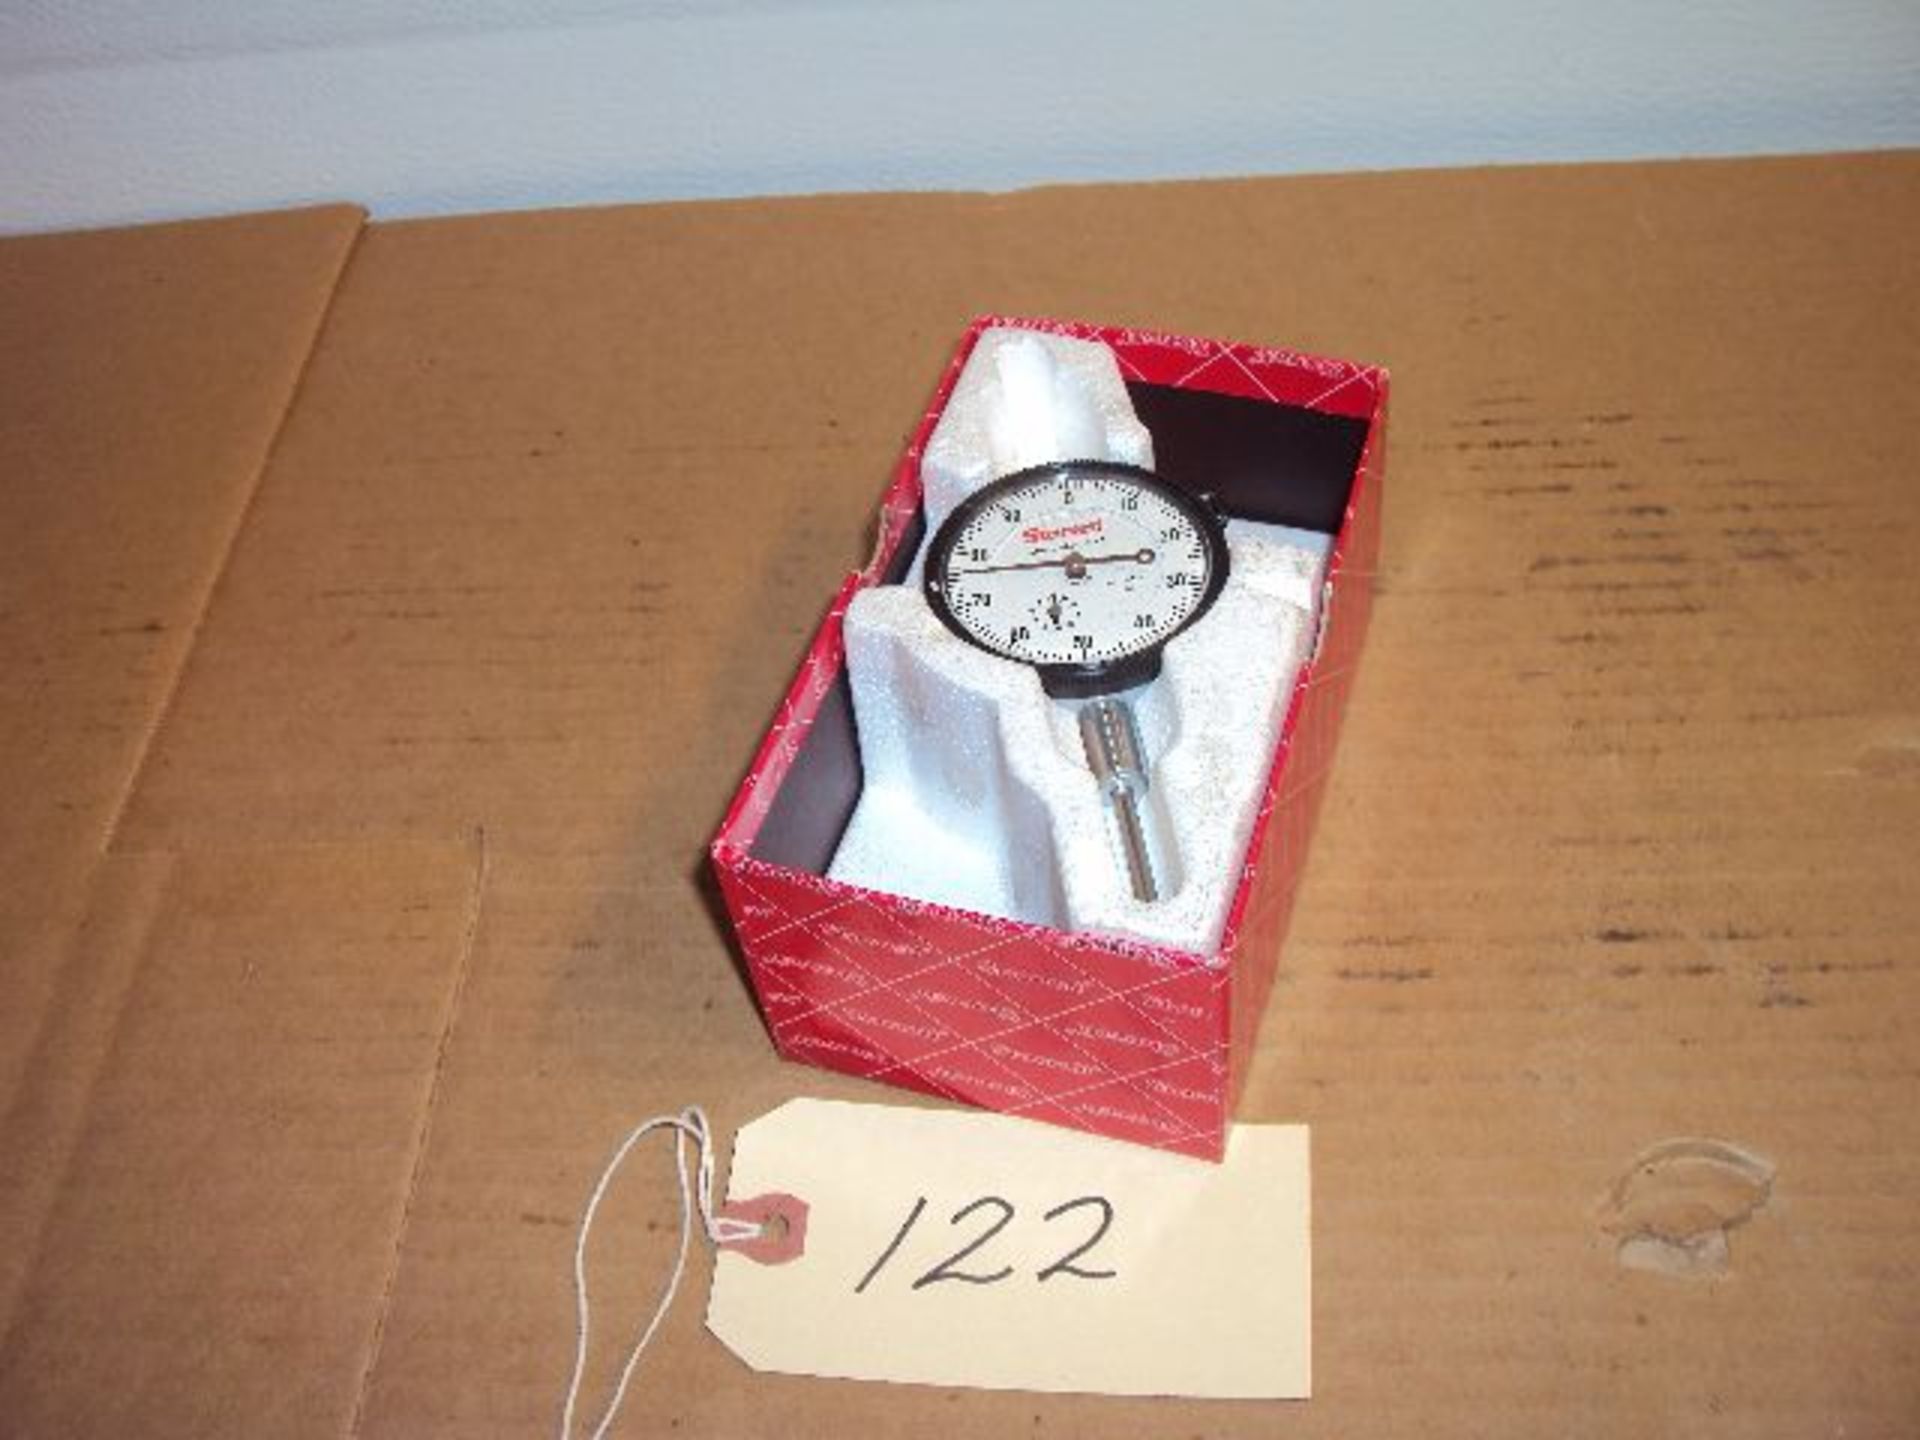 Starrett 25-441J Dial Indicator, 0-1” Fully Jeweled, .001 Increments - Image 4 of 4